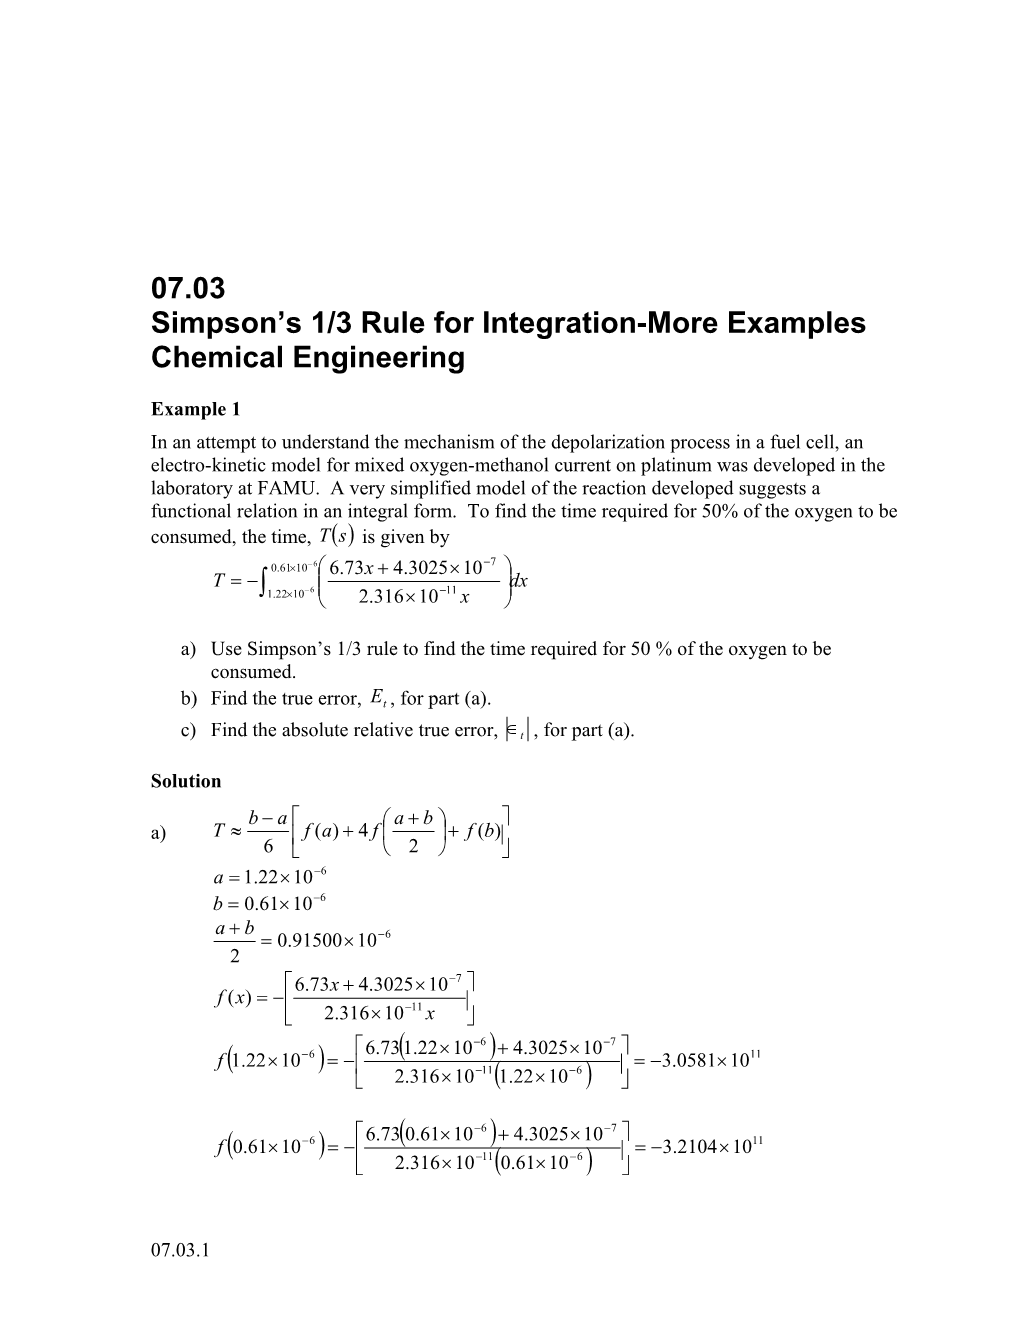 Simpson S 1/3 Rule for Integration-More Examples: Chemical Engineering